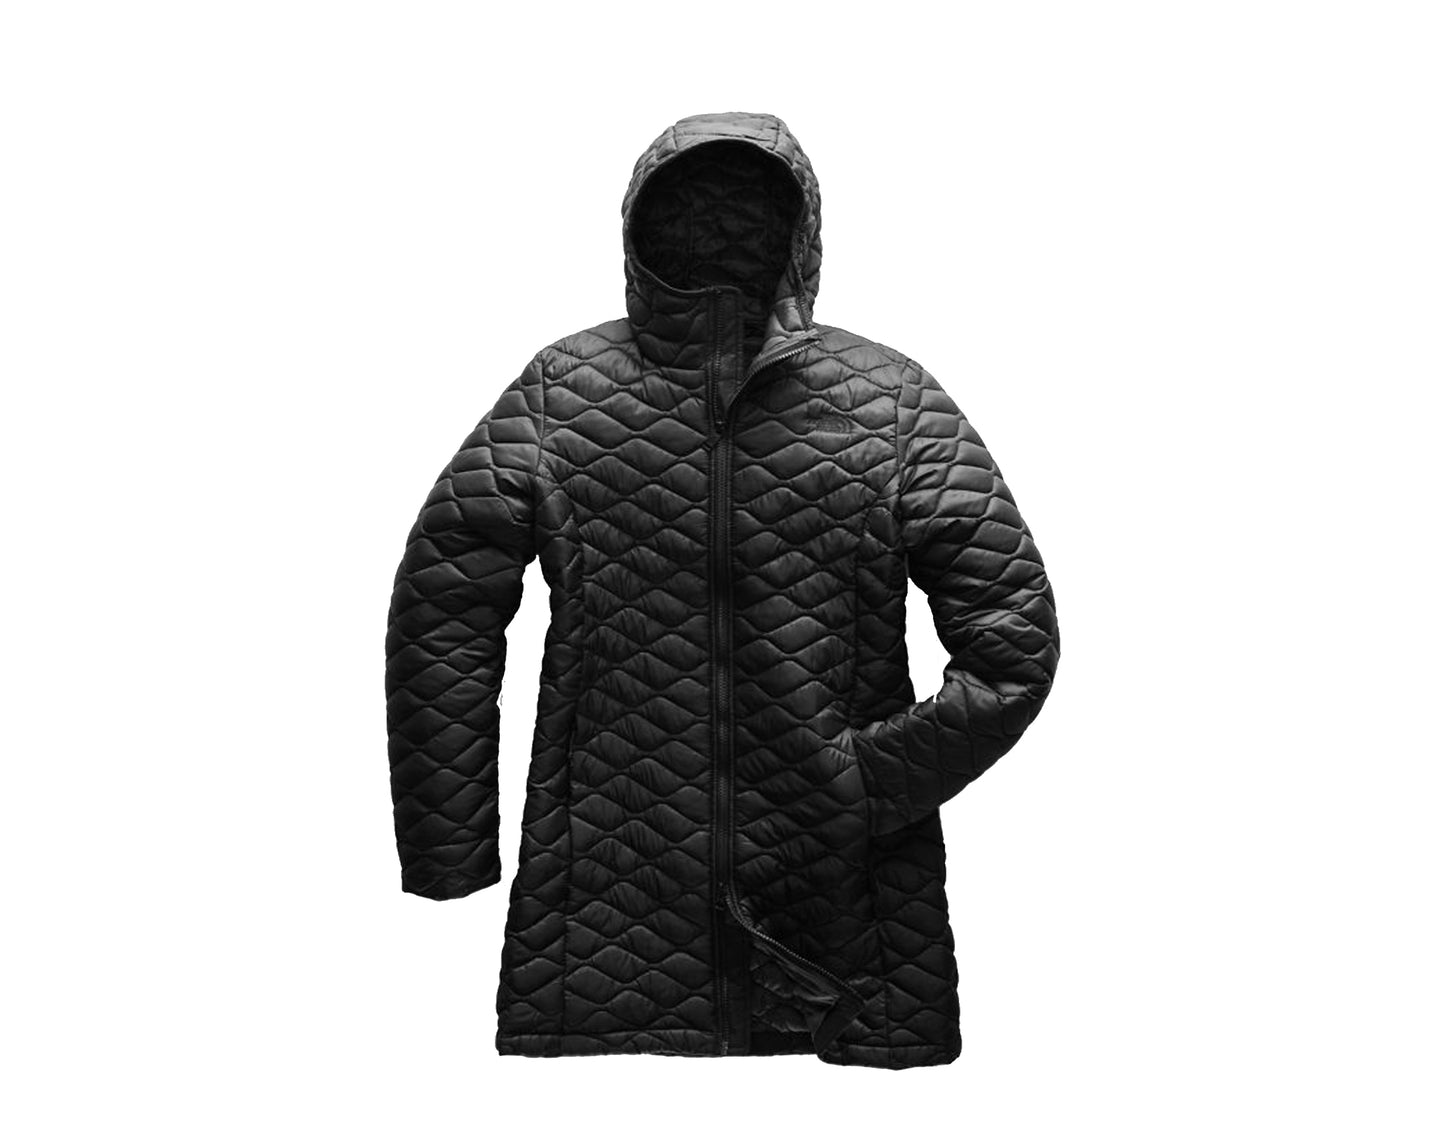 The North Face Thermoball Parka II Women's Jacket